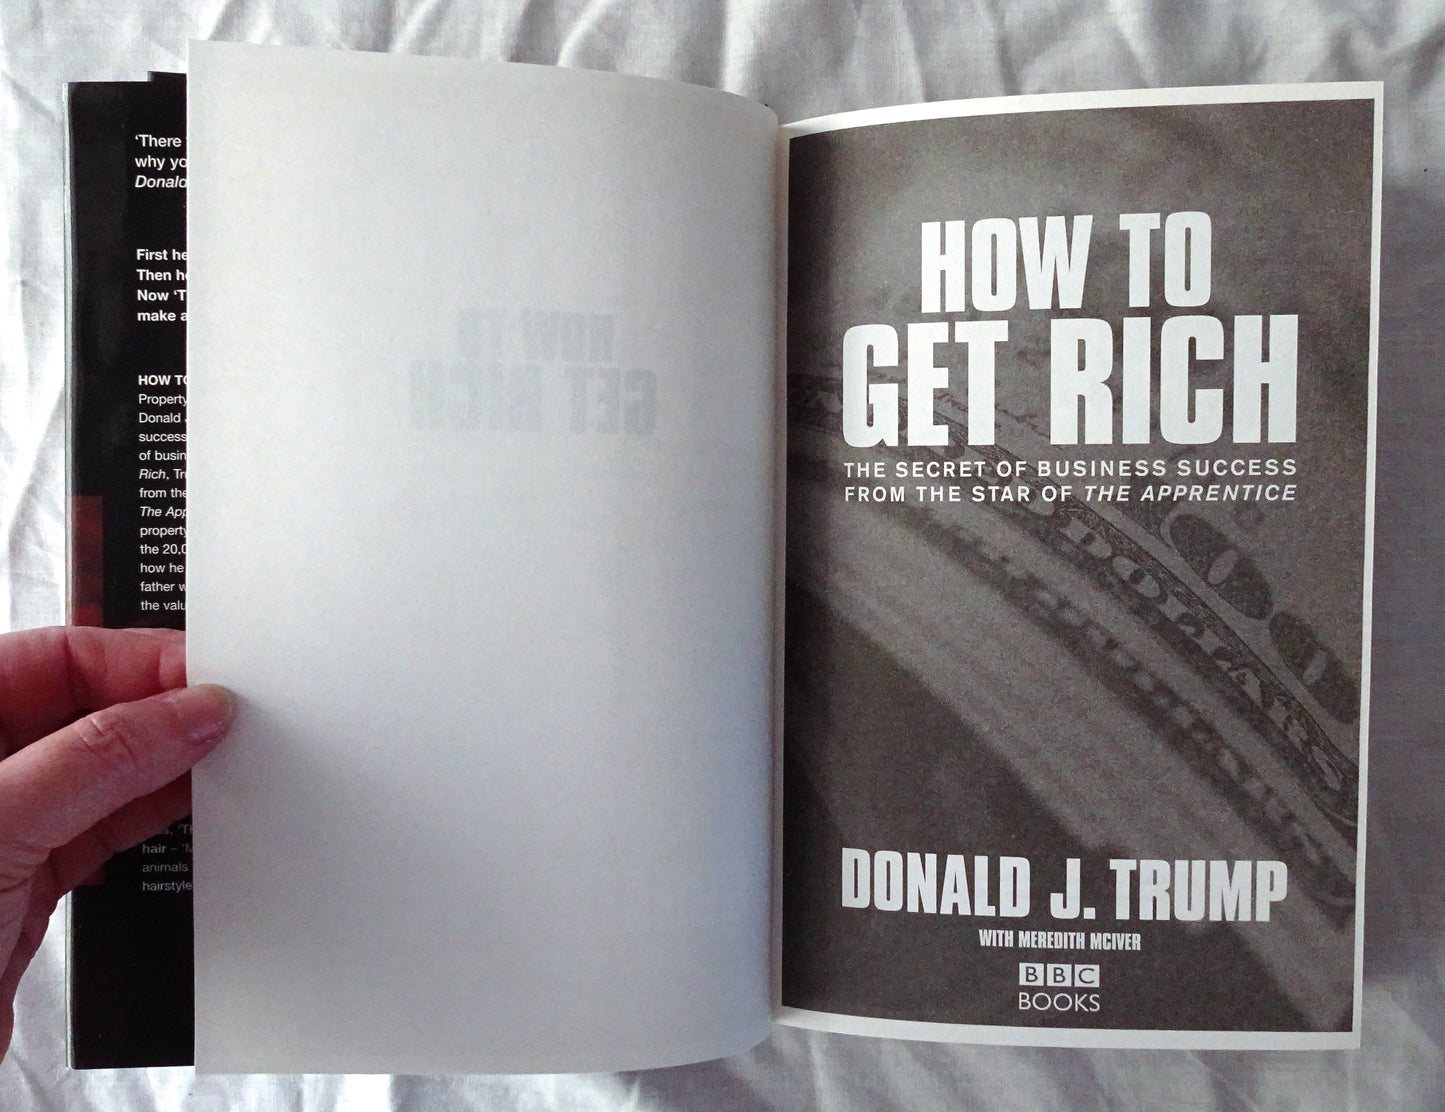 How to Get Rich by Donald J. Trump